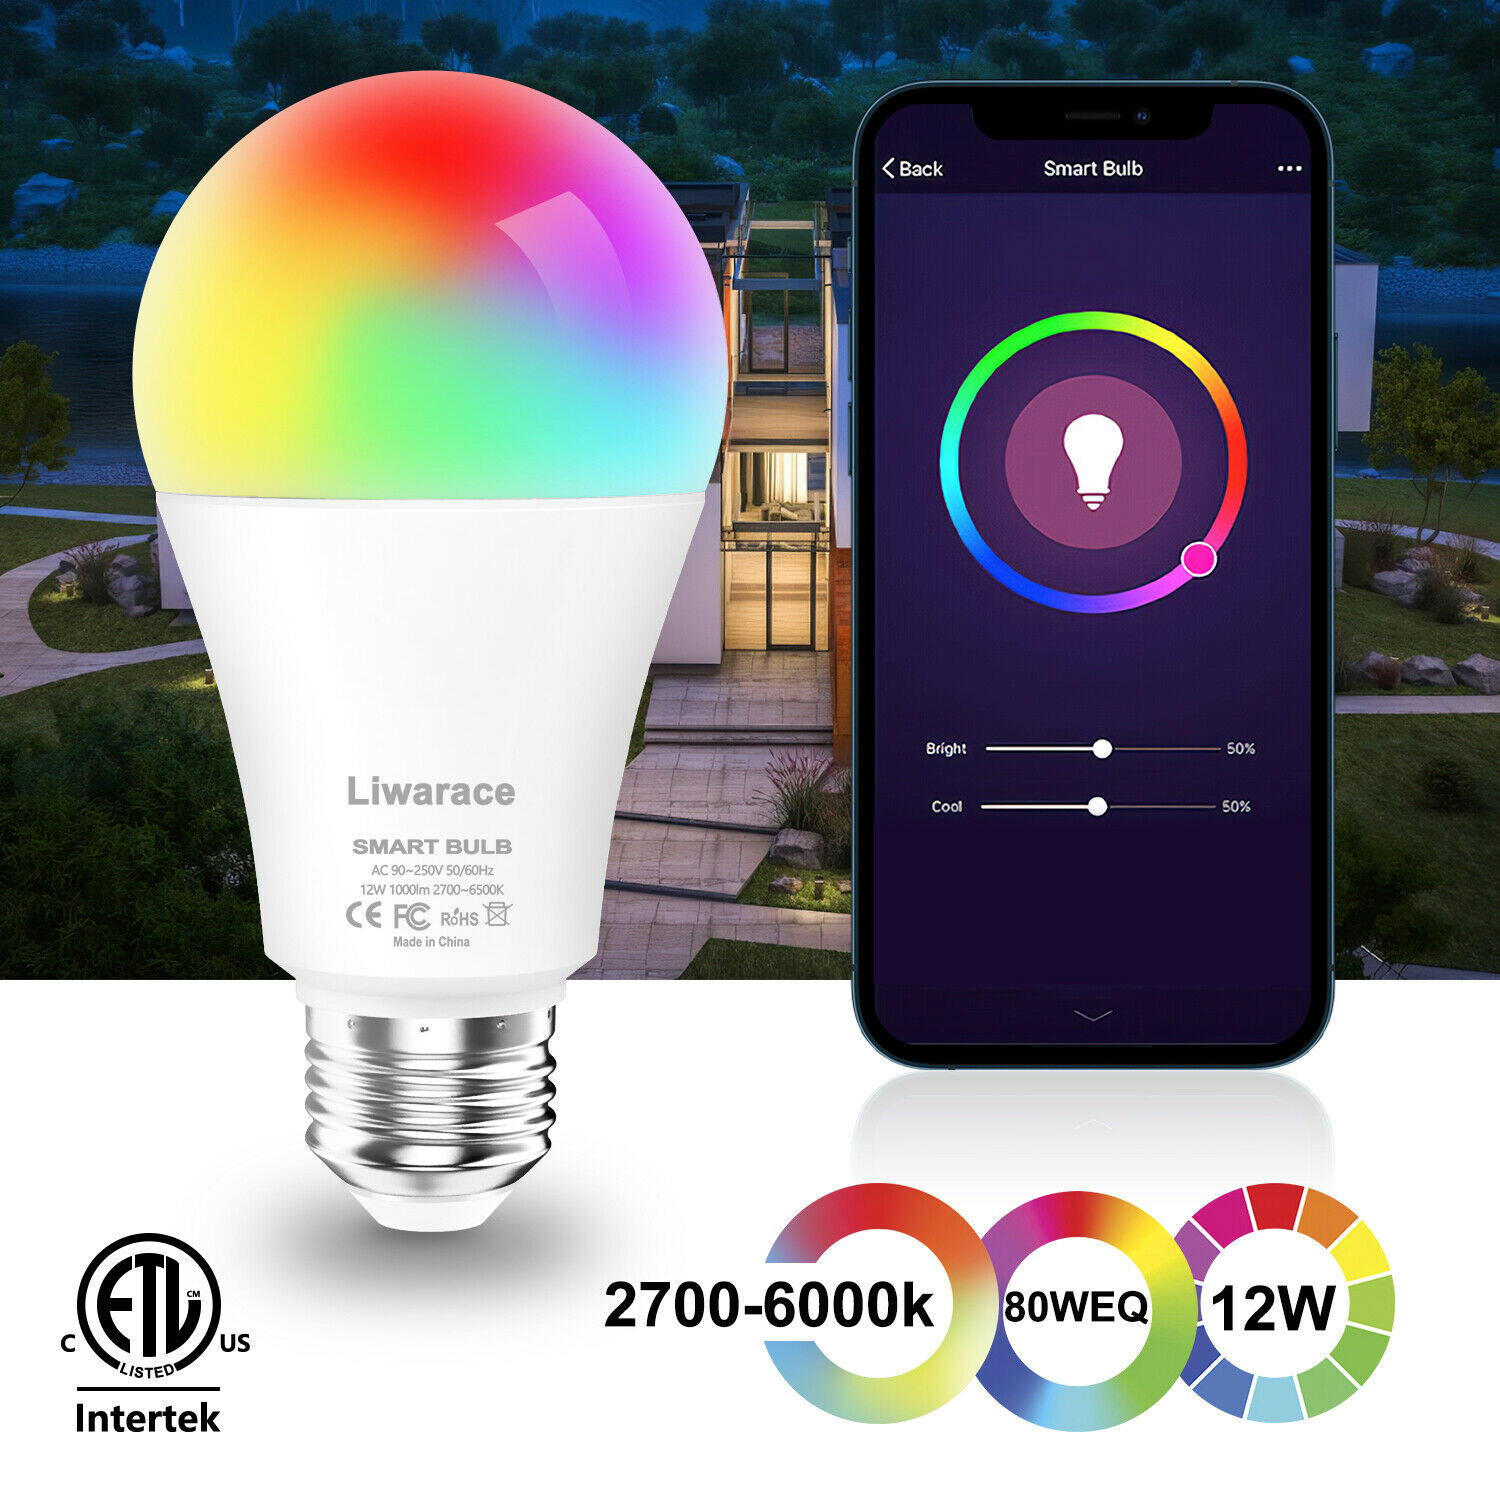 E27 Wireless Dimmable RGB Bulb Colorful LED Smart Lights for Home Lighting